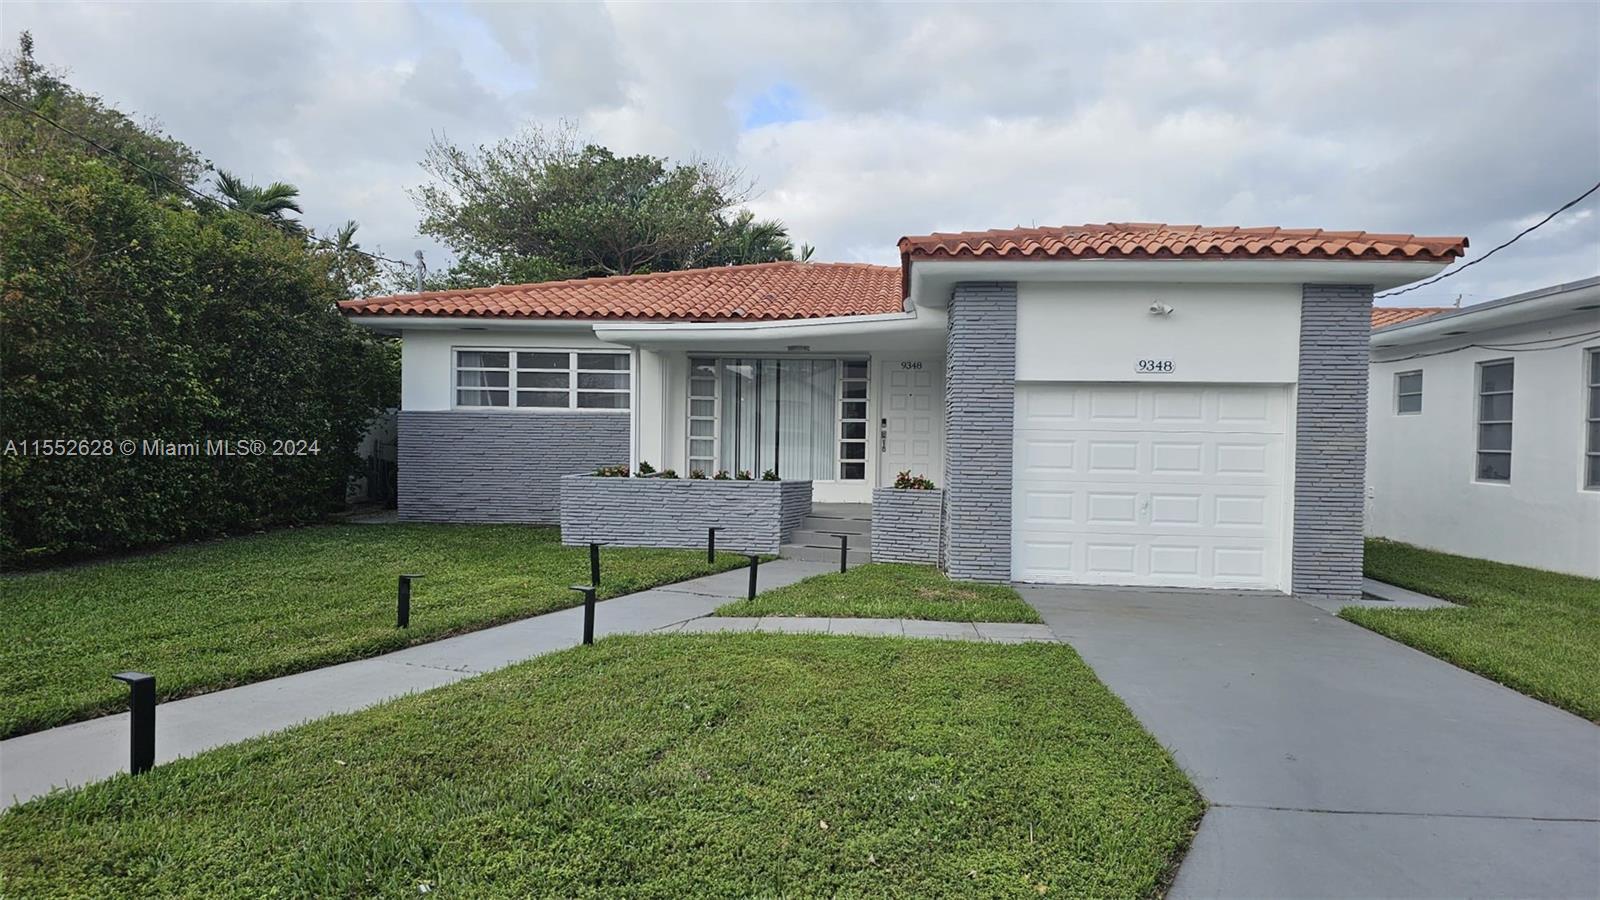 Photo of 9348 Byron Ave in Surfside, FL